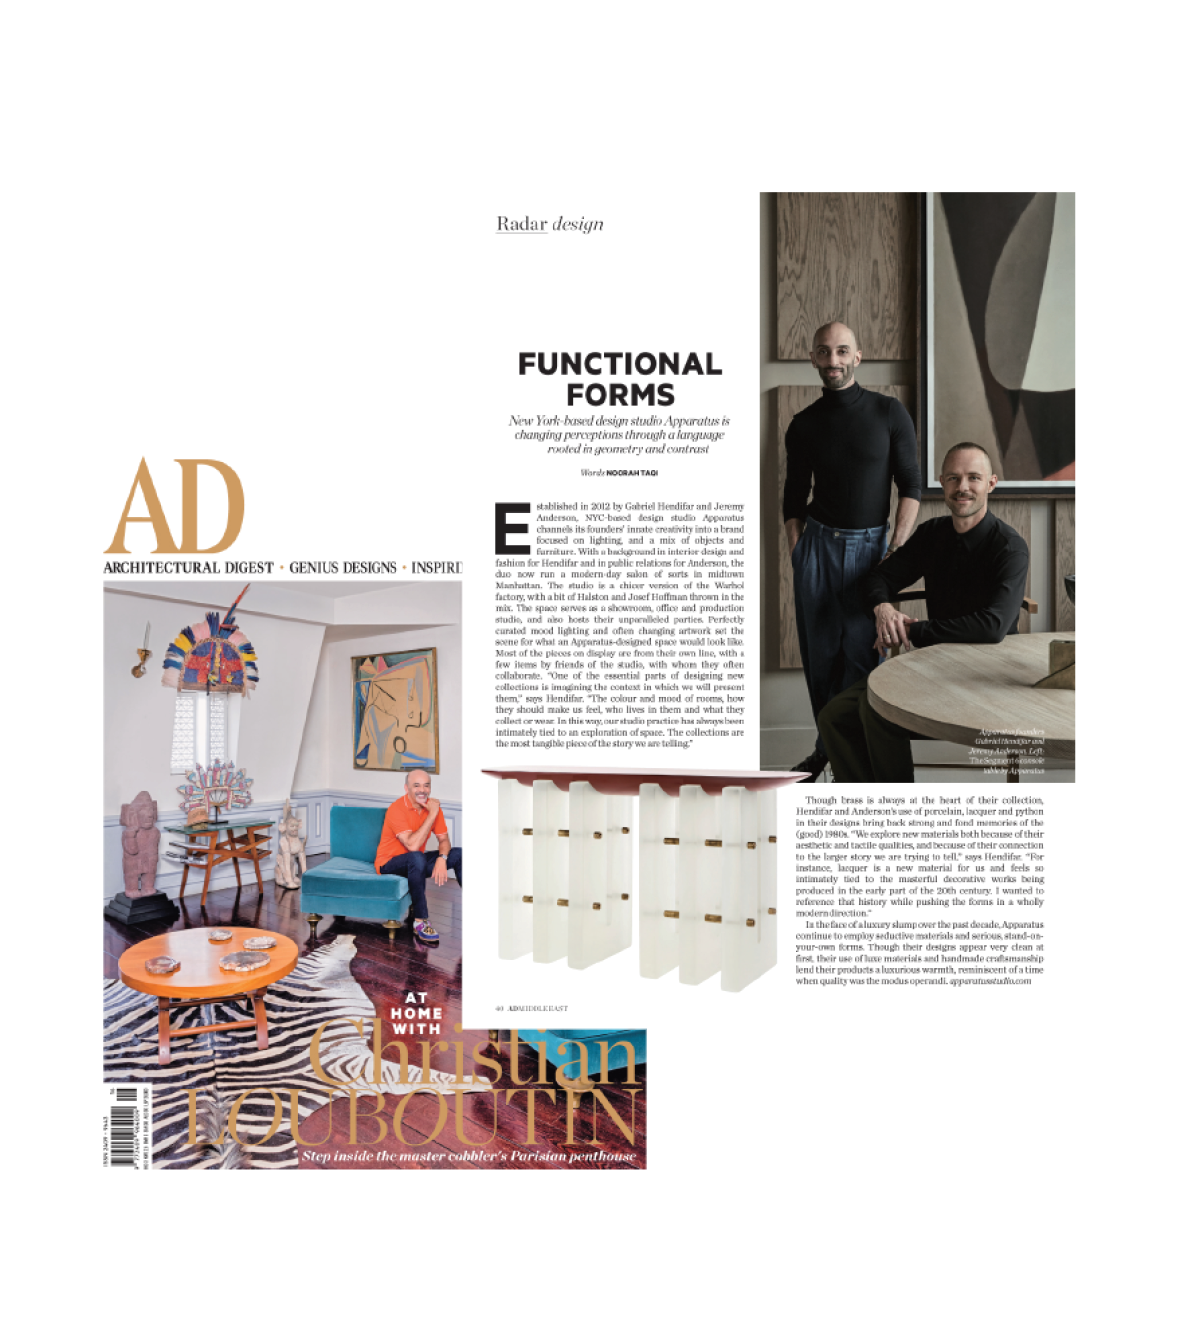 ARCHITECTURAL DIGEST MIDDLE EAST